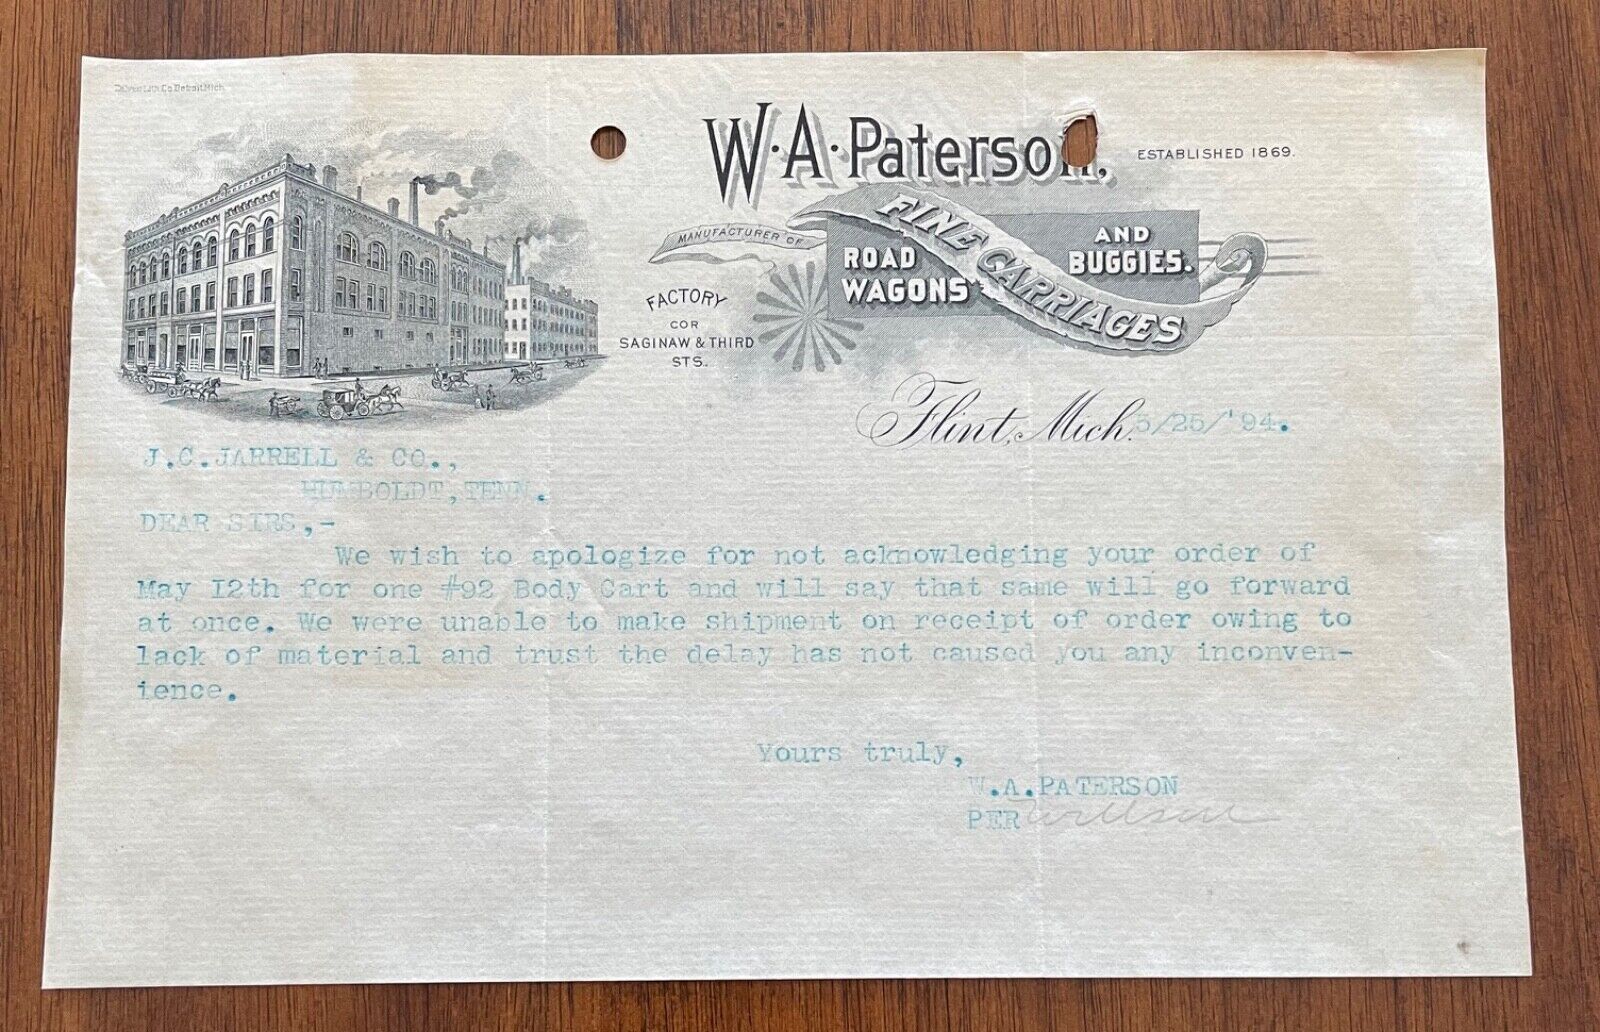 1894 letterhead WA Paterson road wagons carriages buggies graphic Flint MI